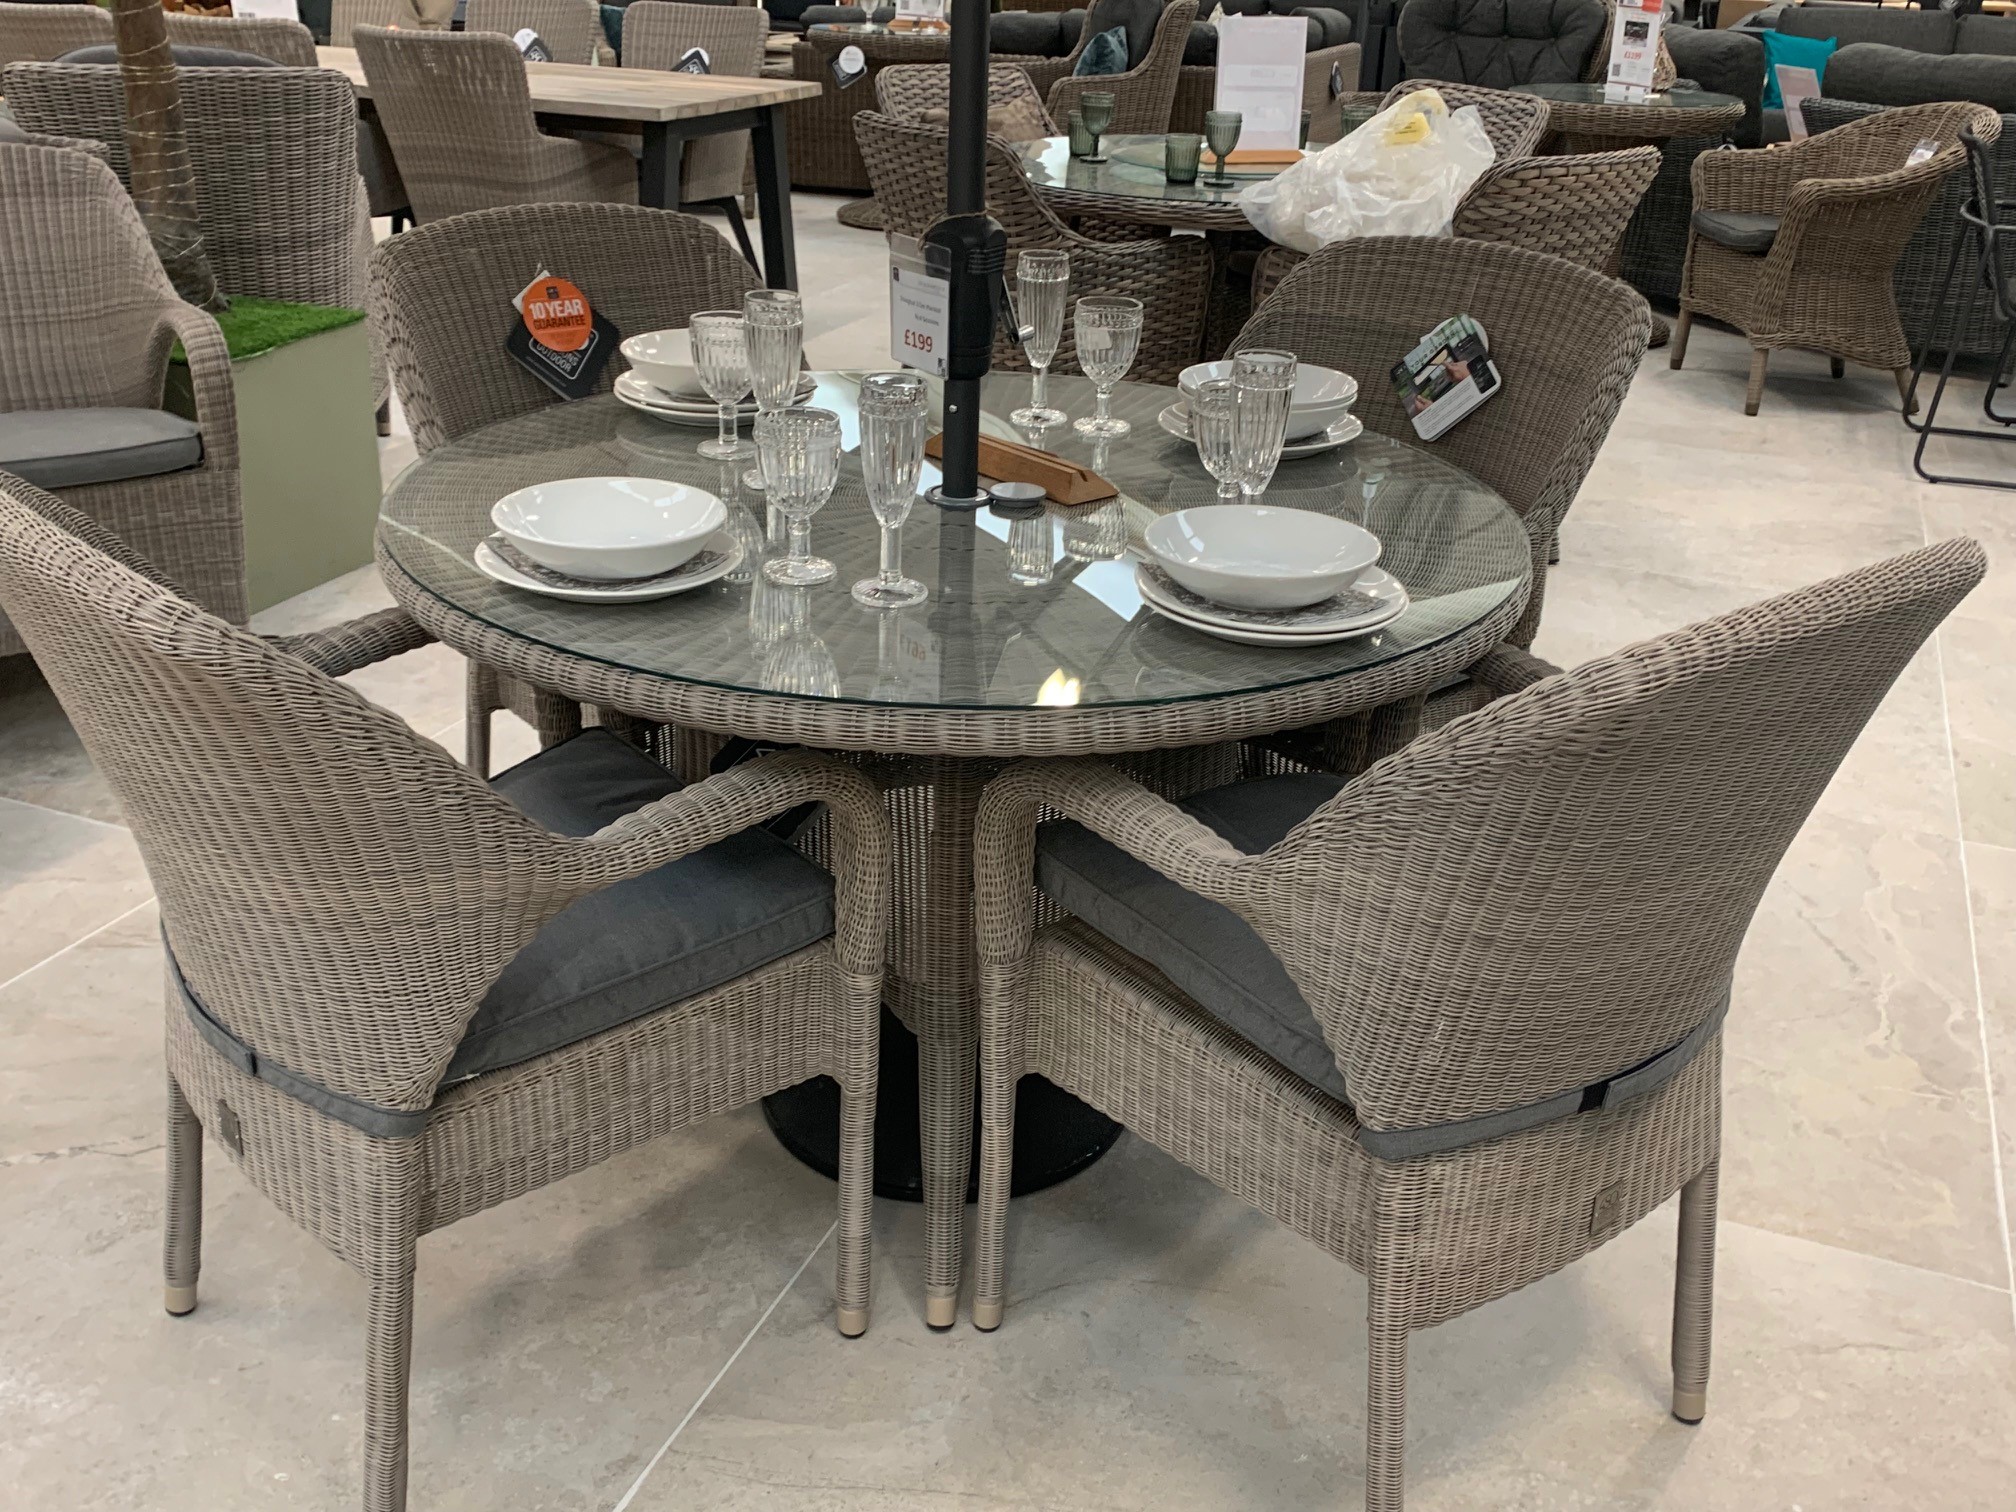 4 Seasons Outdoor Sussex 4 Seat Stacking Dining Set in Polyloom Pebble